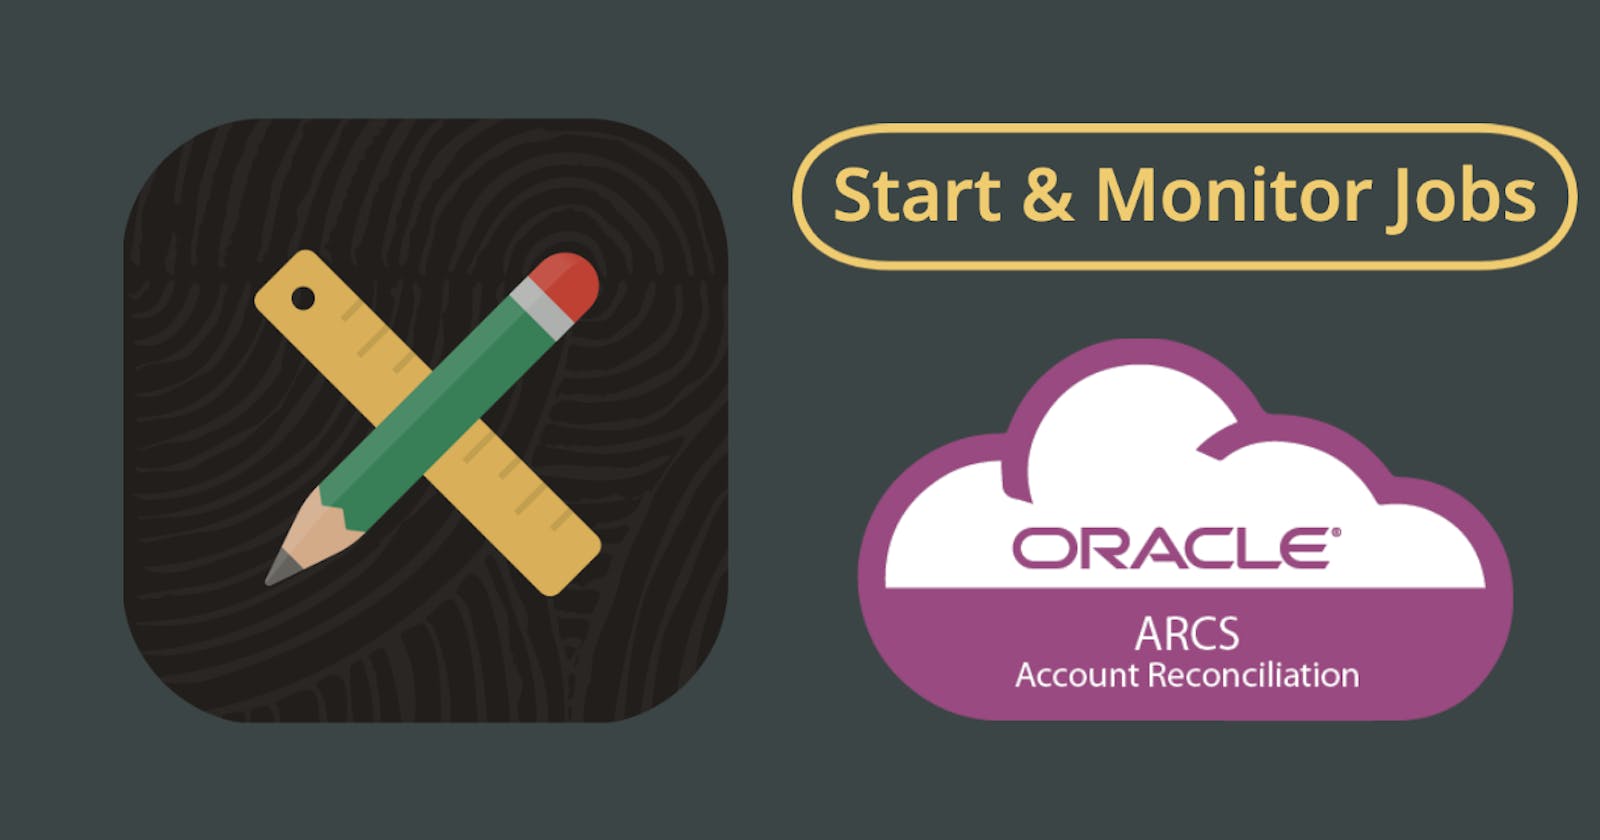 Run & Monitor Jobs in Oracle ARCS from Oracle APEX